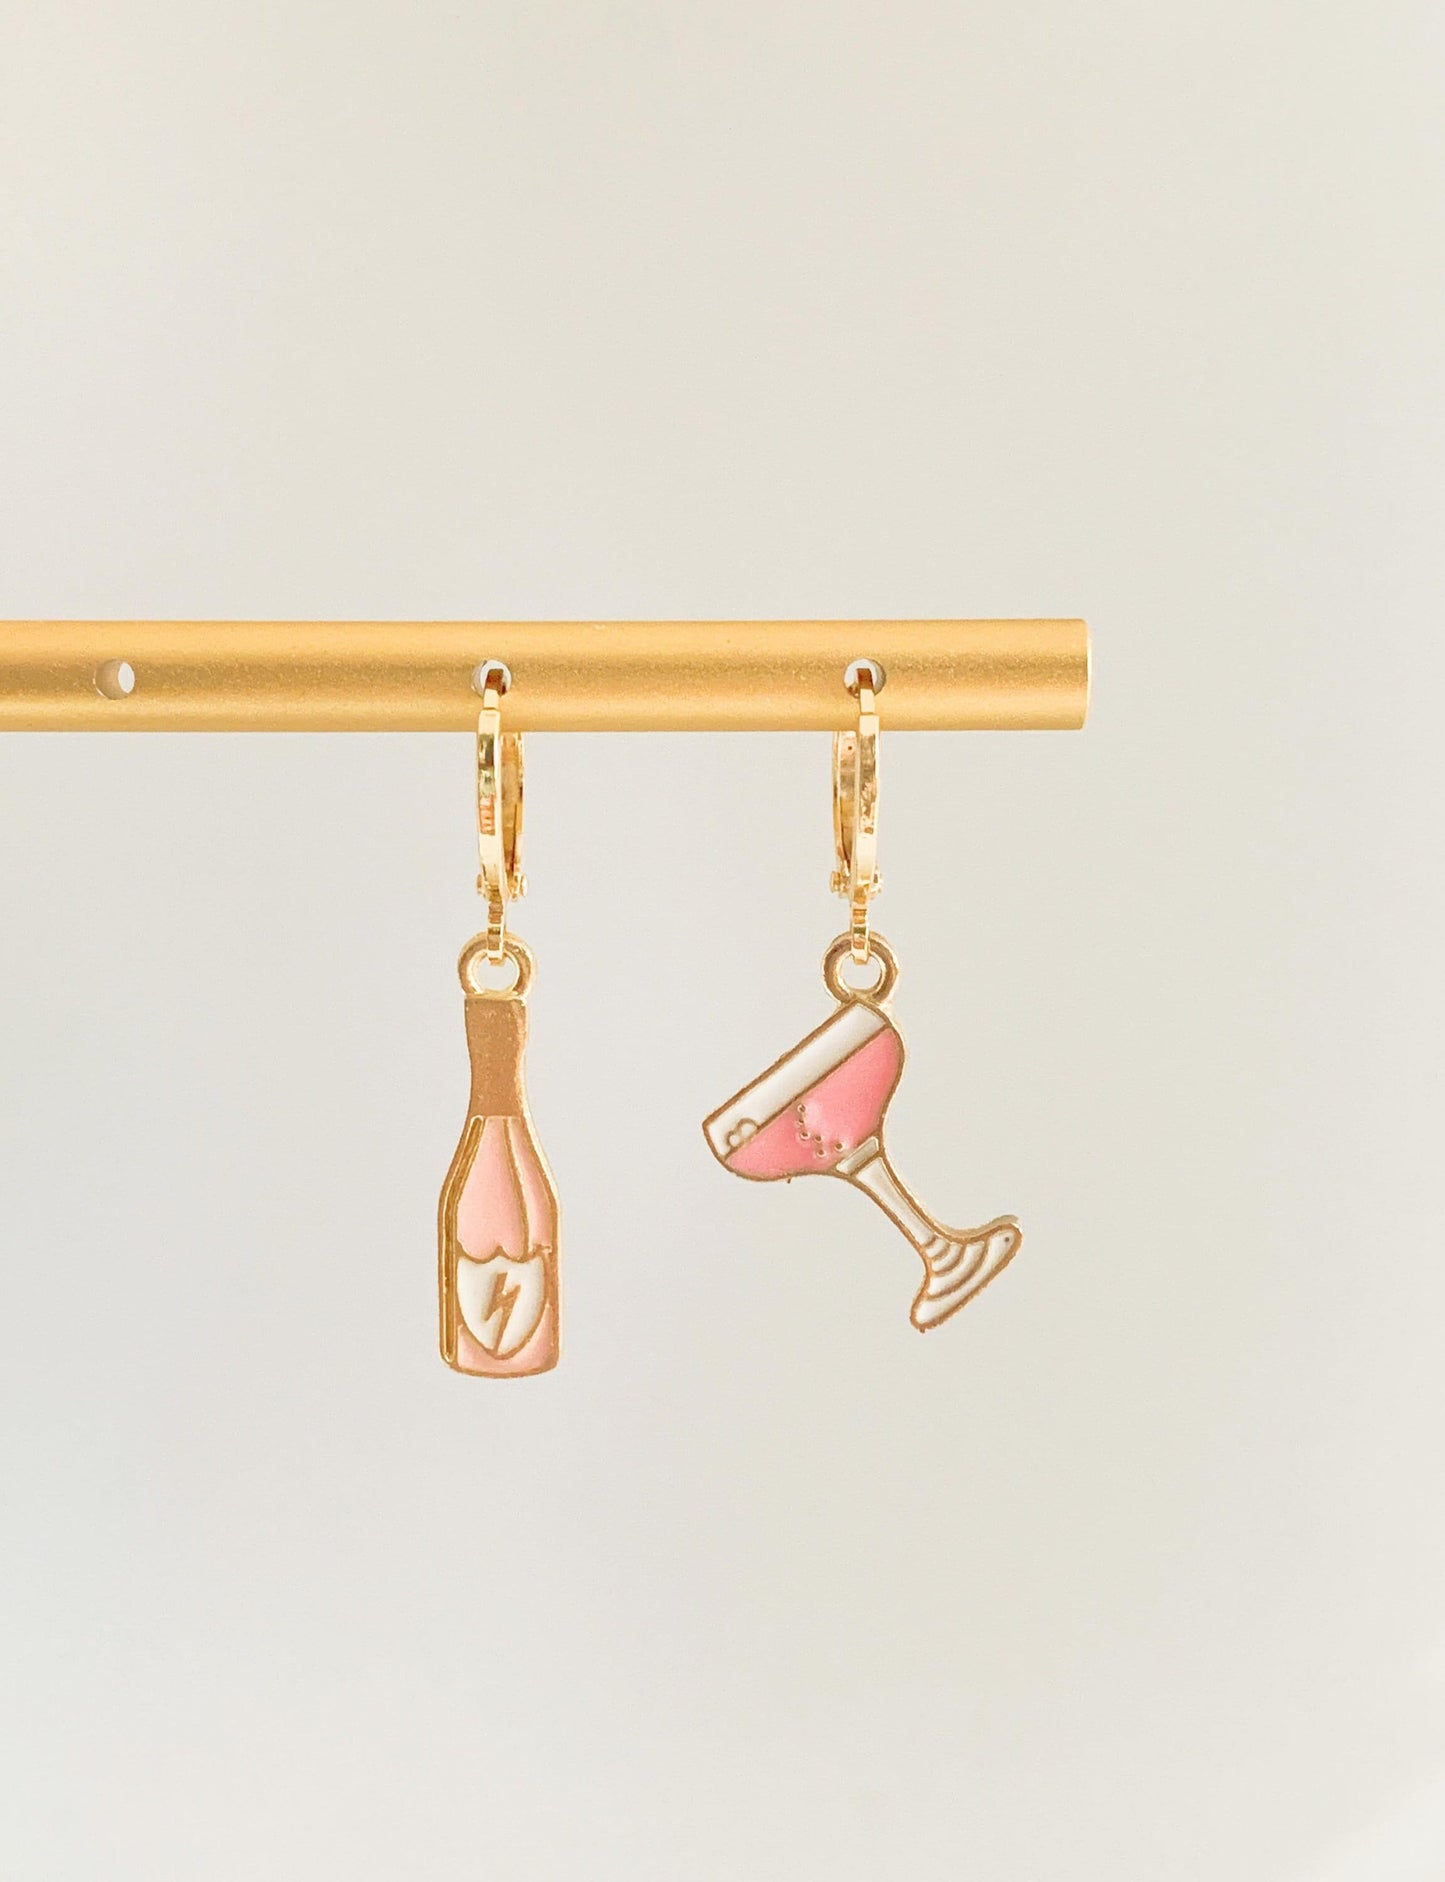 Unique Champagne and Glass Earrings